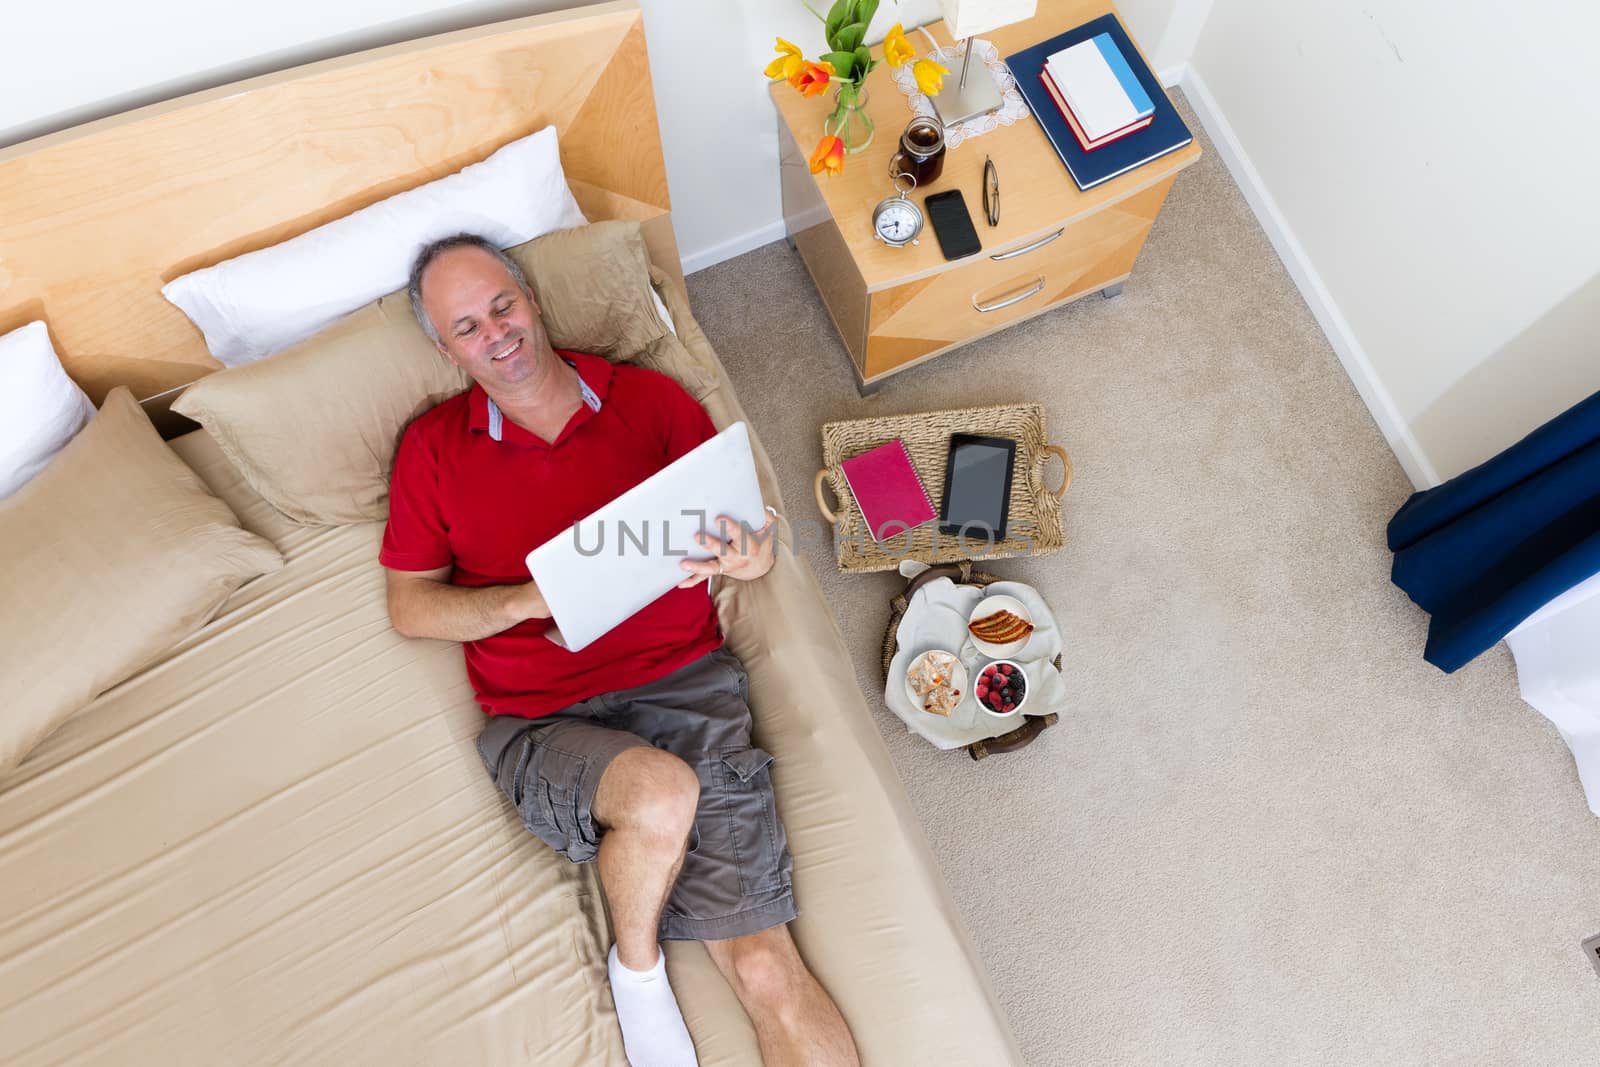 High Angle View of Smiling Mature Man Lying on Bed with Laptop in Hotel Room with Remnants of Breakfast Tray and Personal Effects on Floor